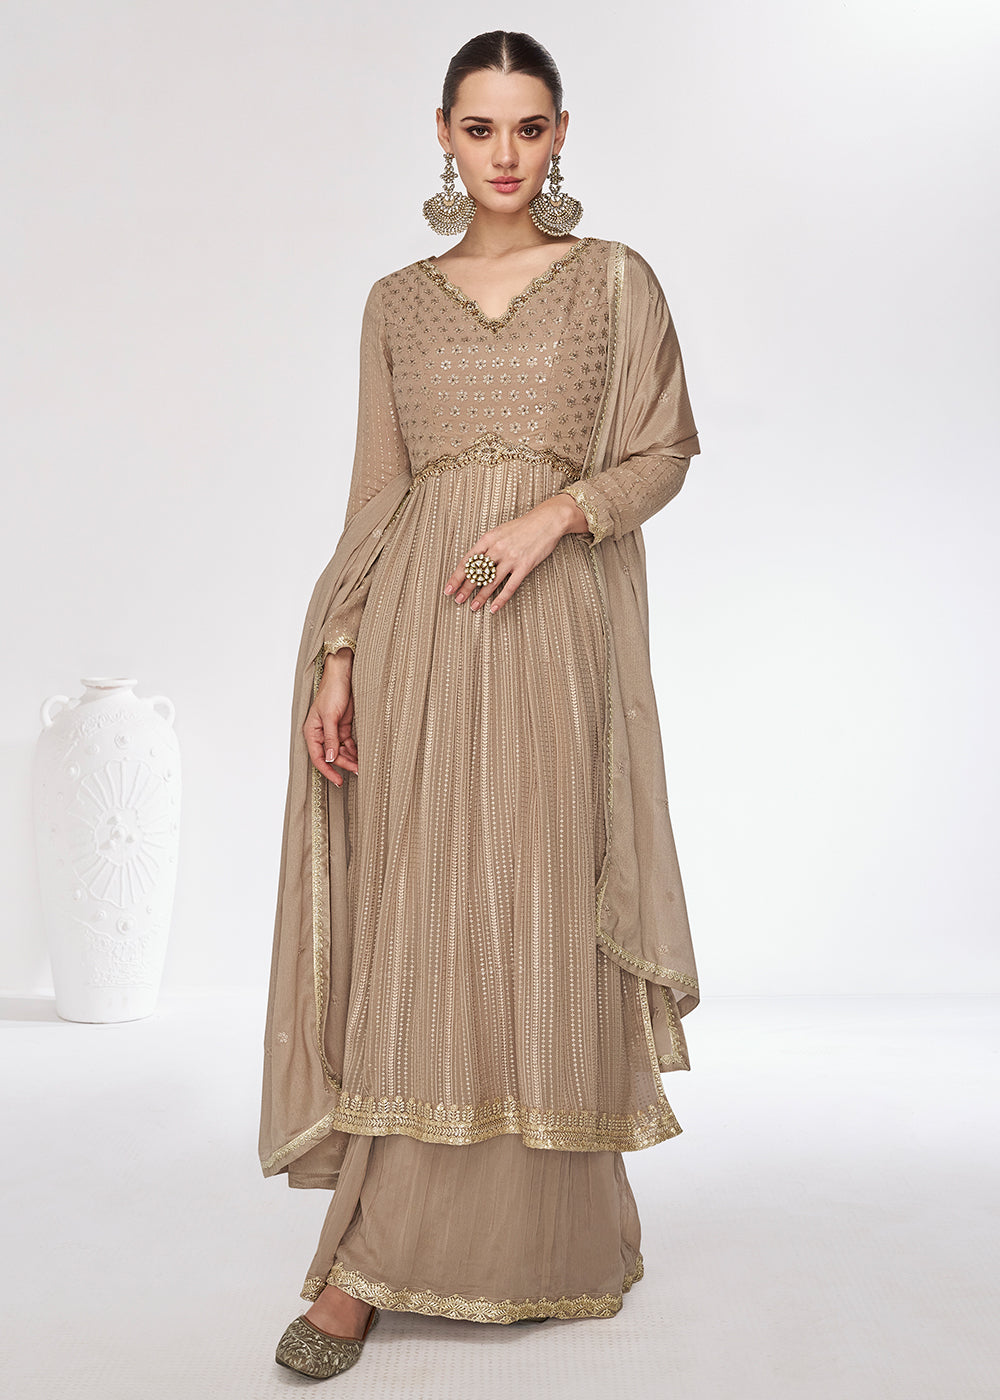 Buy Now Georgette Premium Beige Embroidered Palazzo Salwar Suit Online in USA, UK, Canada, Germany, Australia & Worldwide at Empress Clothing.